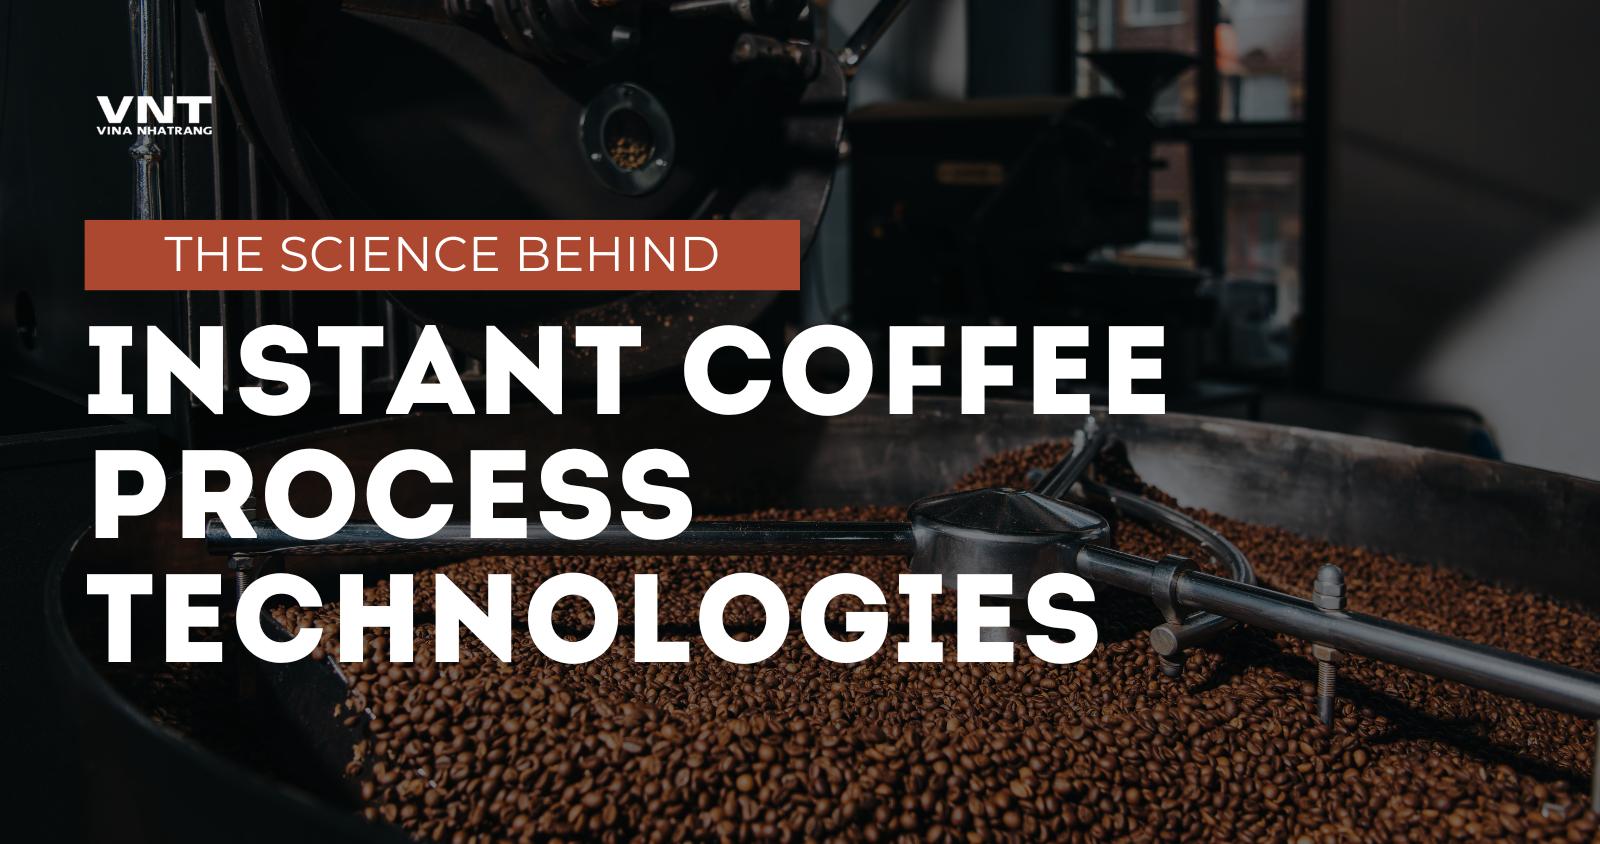 Instant Coffee Process Technologies – Technologies used in instant coffee processing